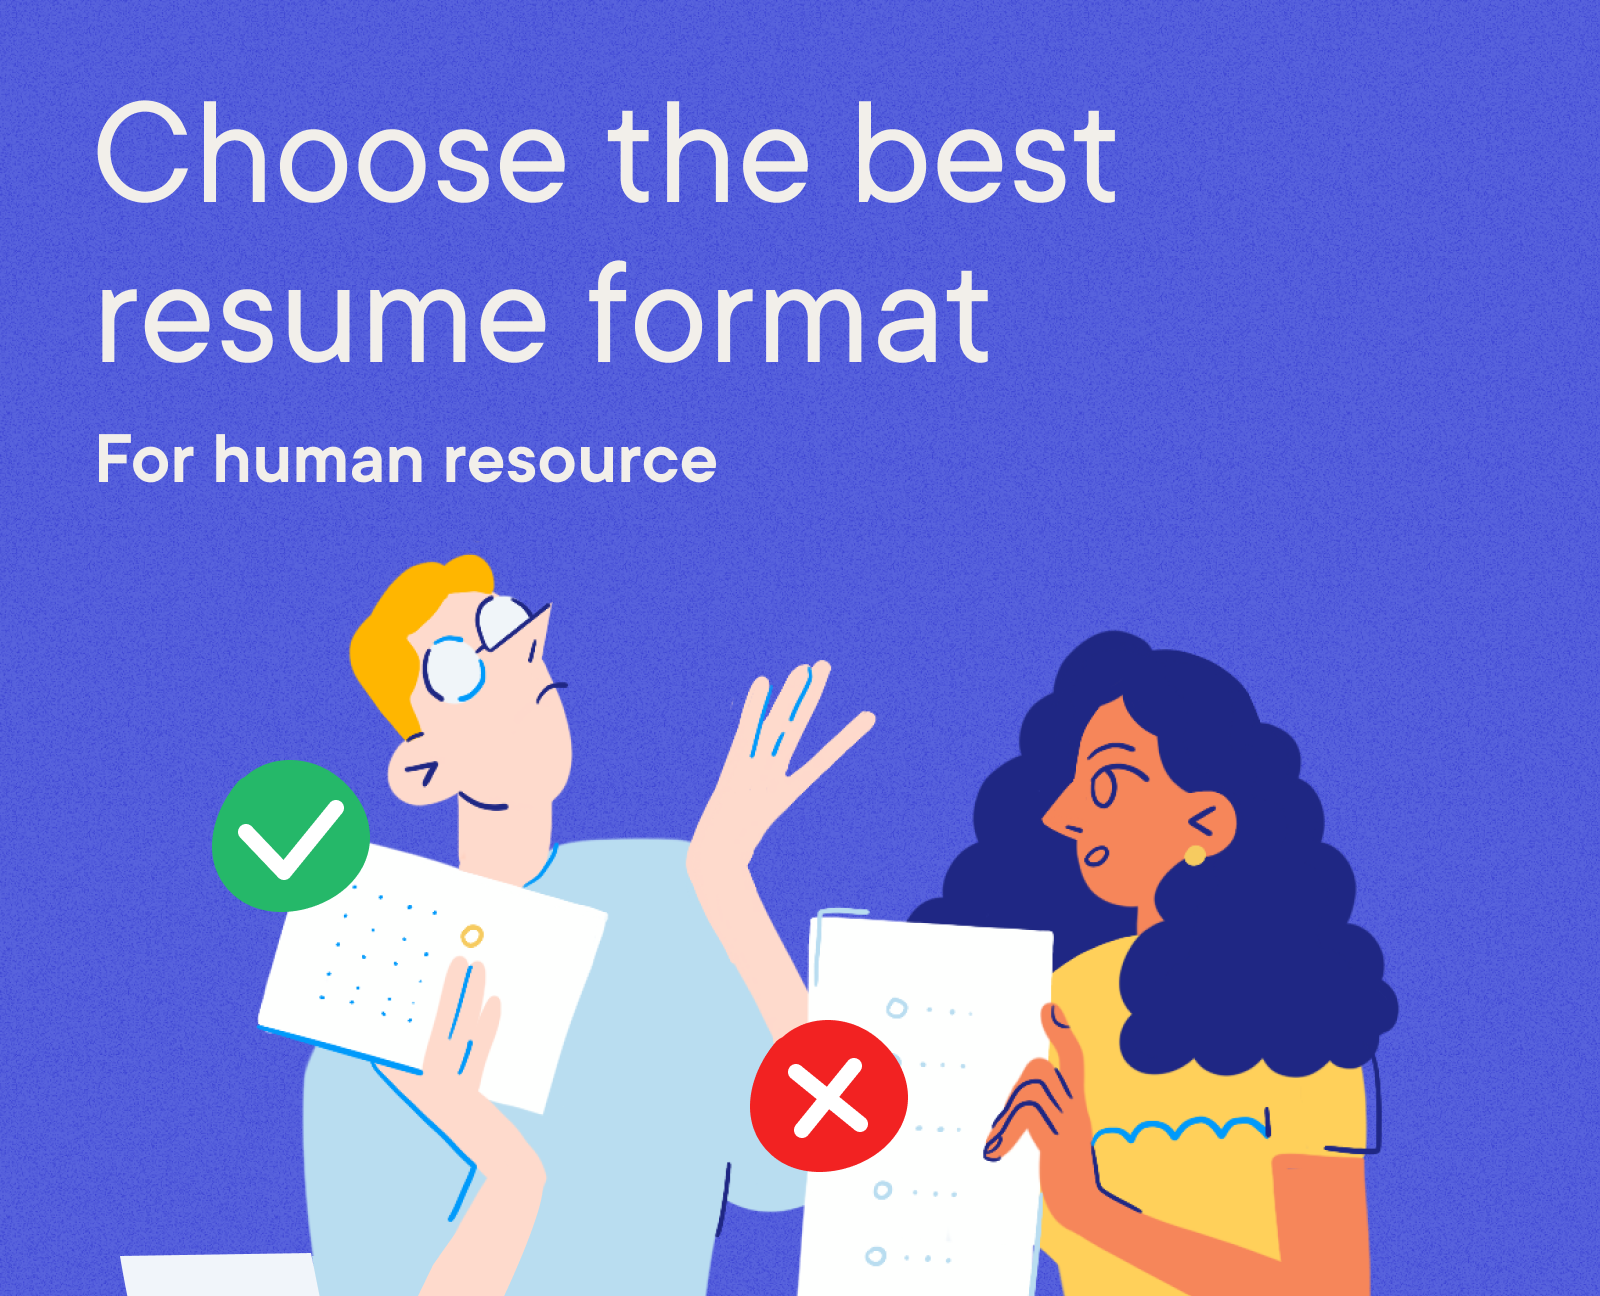 Human Resources - Choose the best resume format